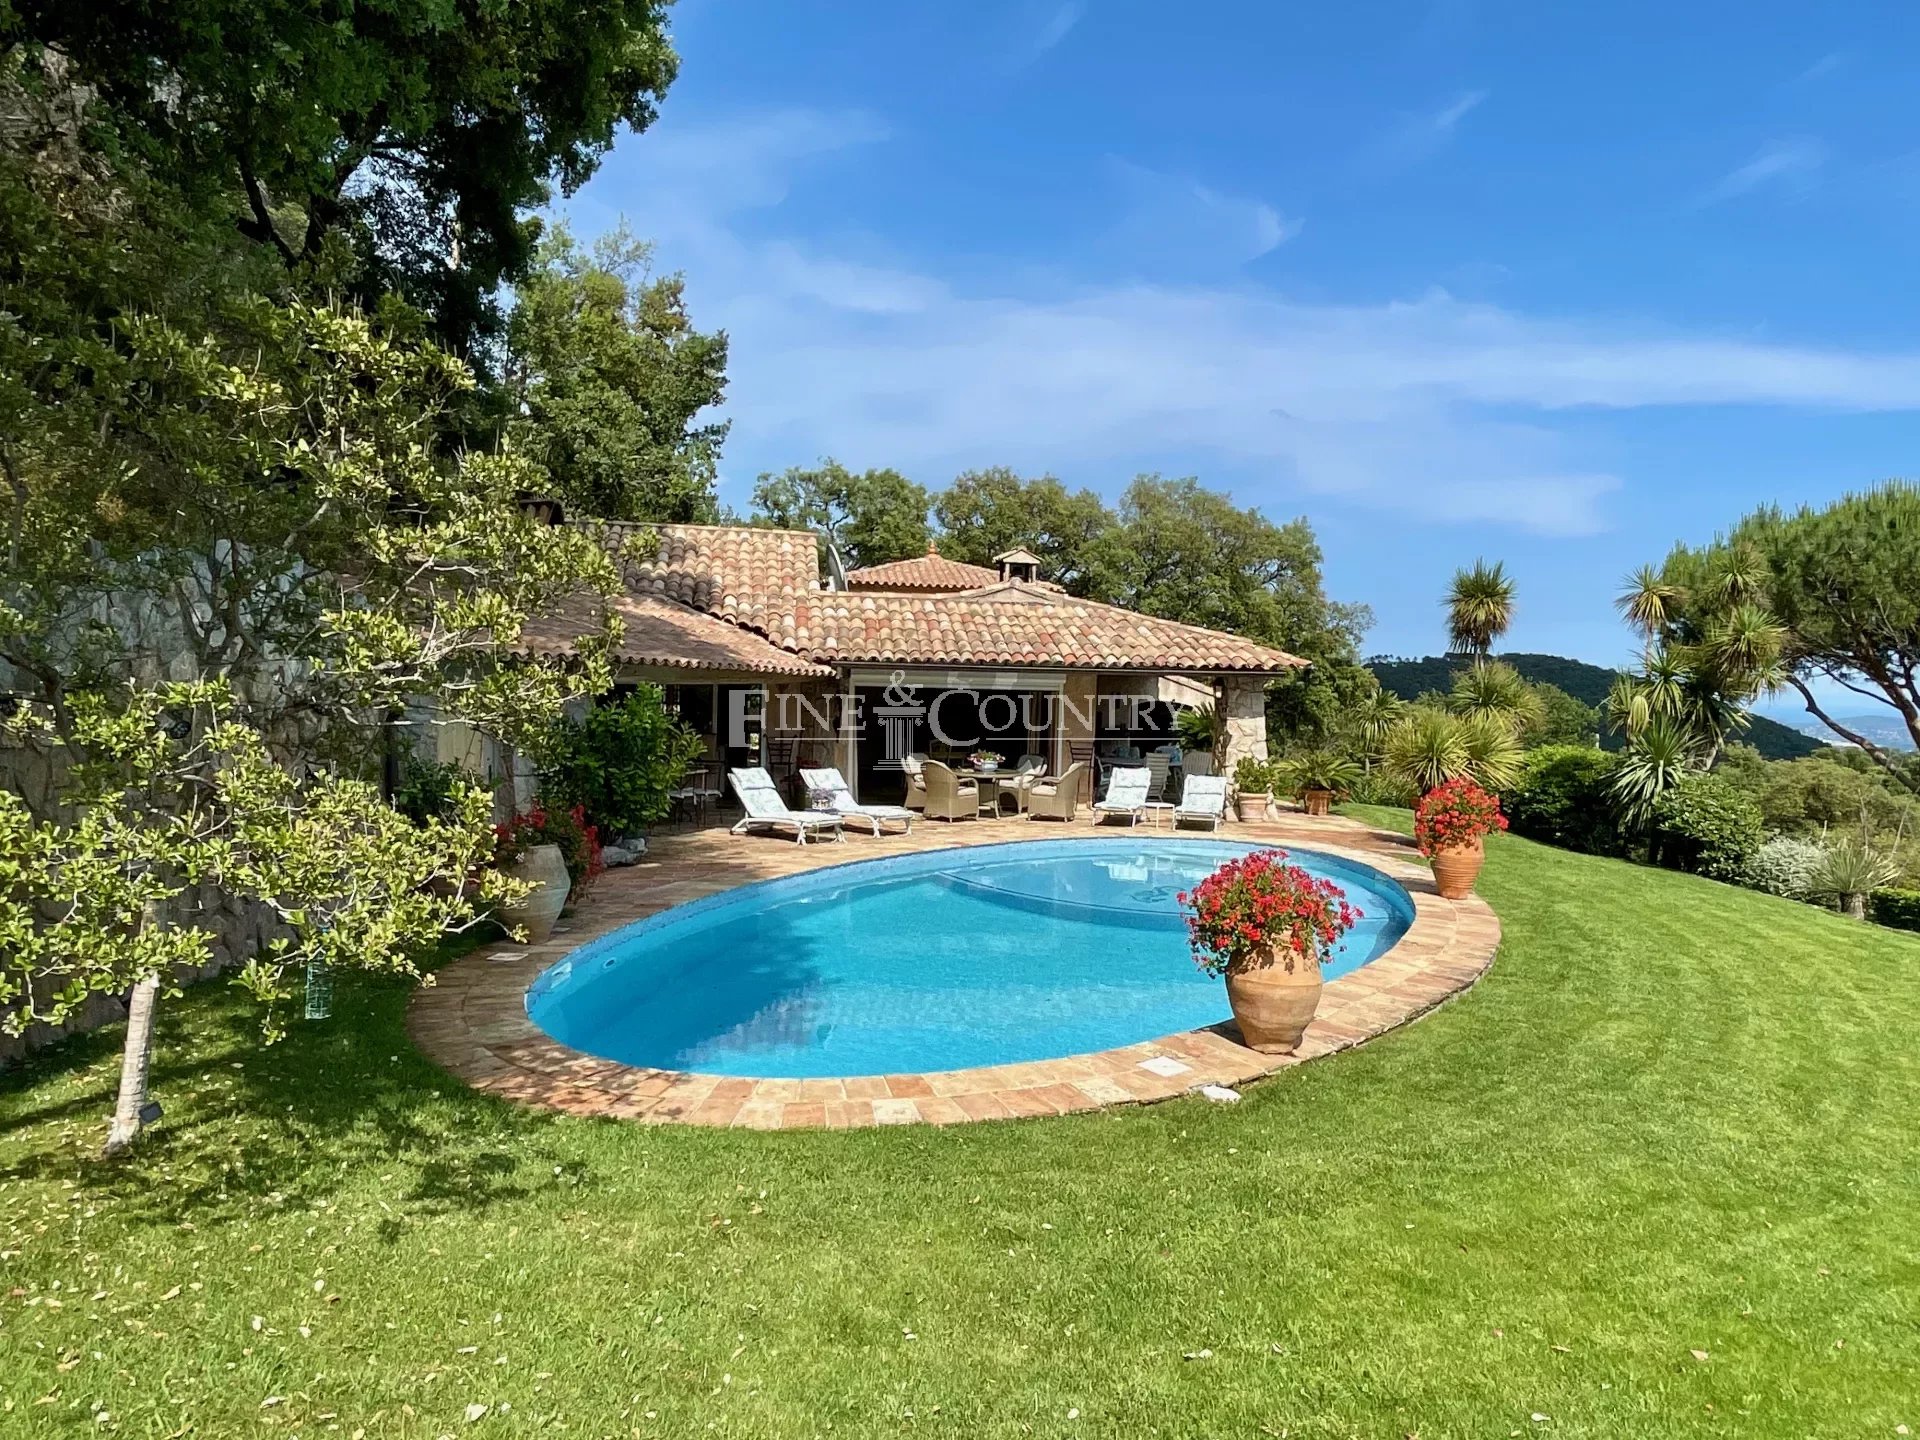 Photo of Villa for sale in La Garde Freinet with panoramic views